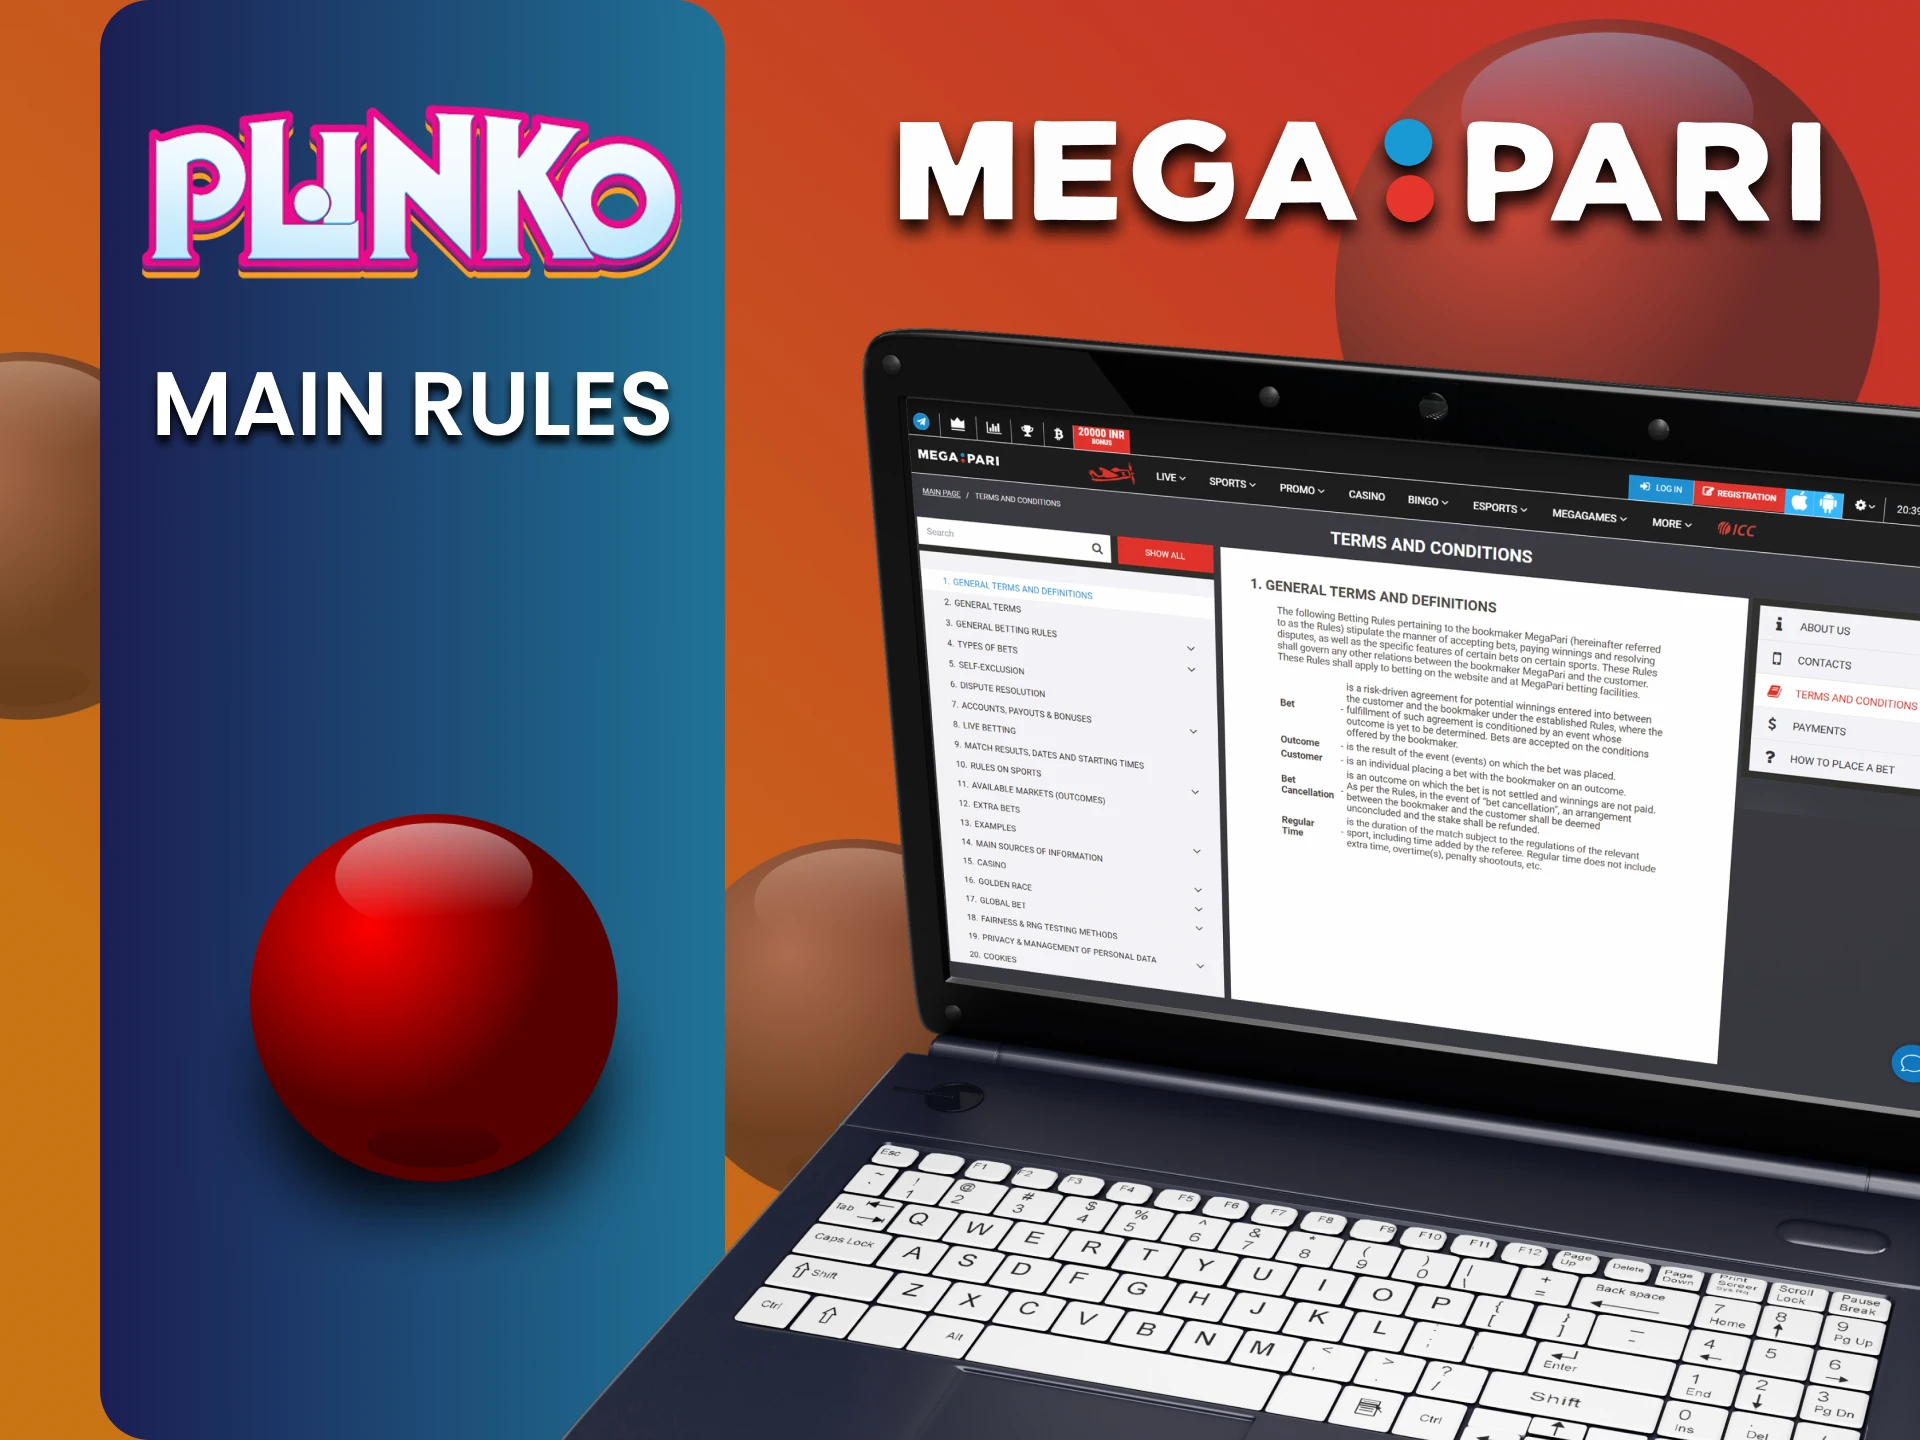 Learn the Megapari rules for playing Plinko.